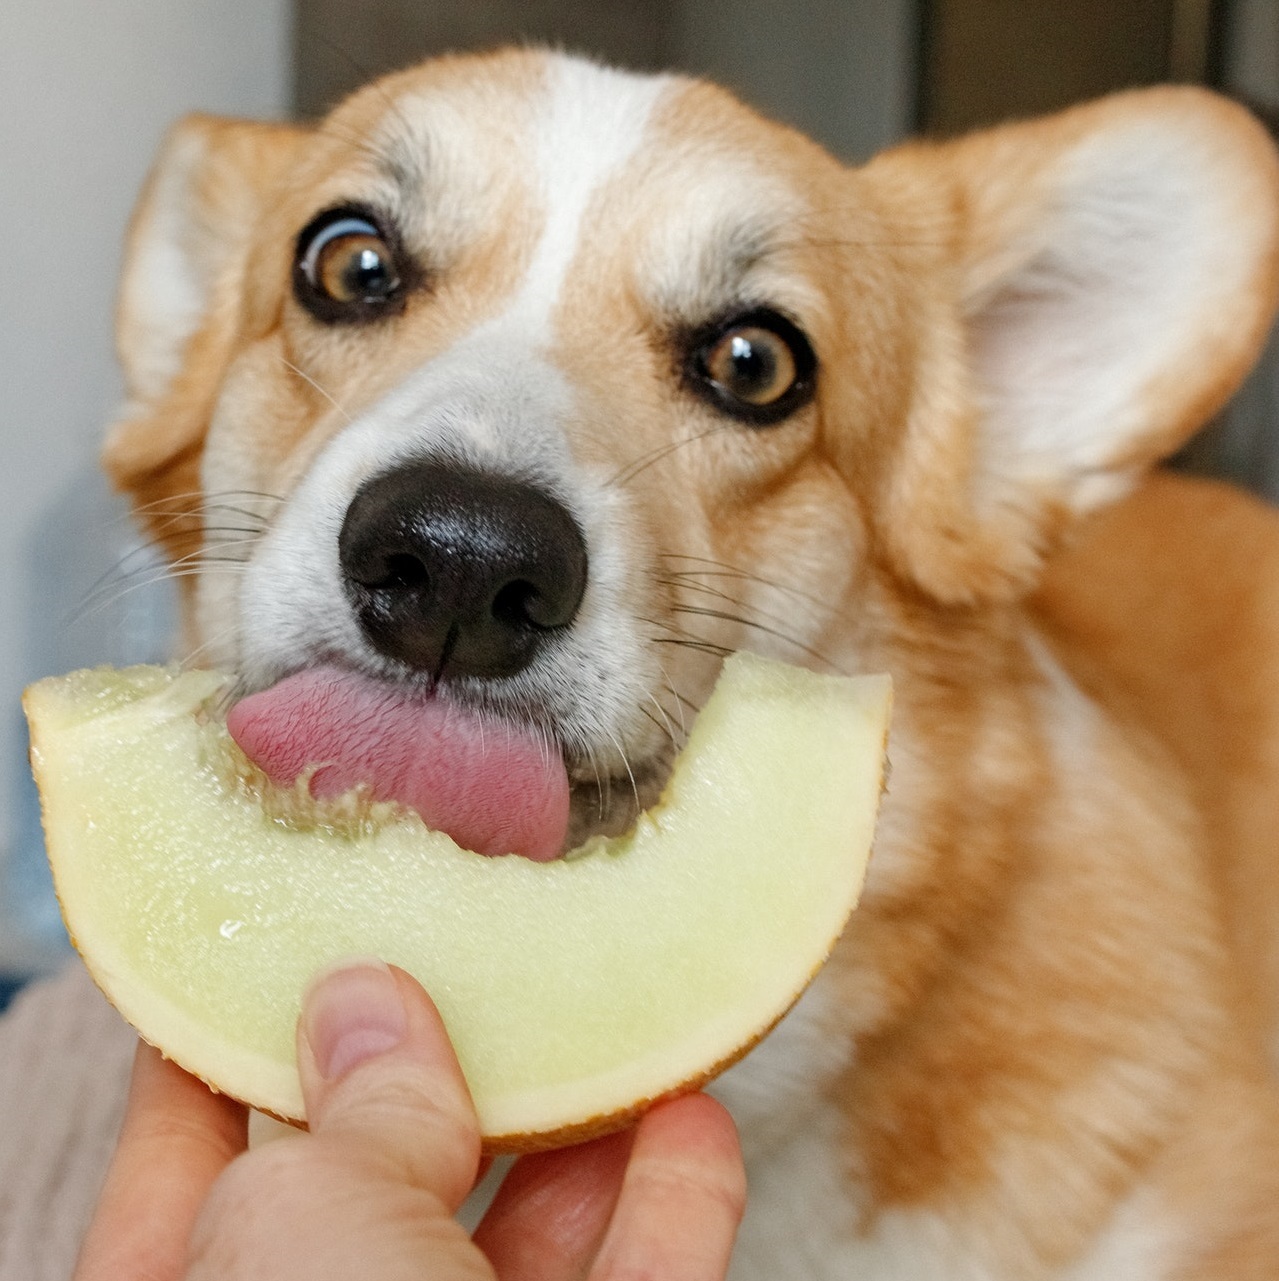 Can dogs eat melon